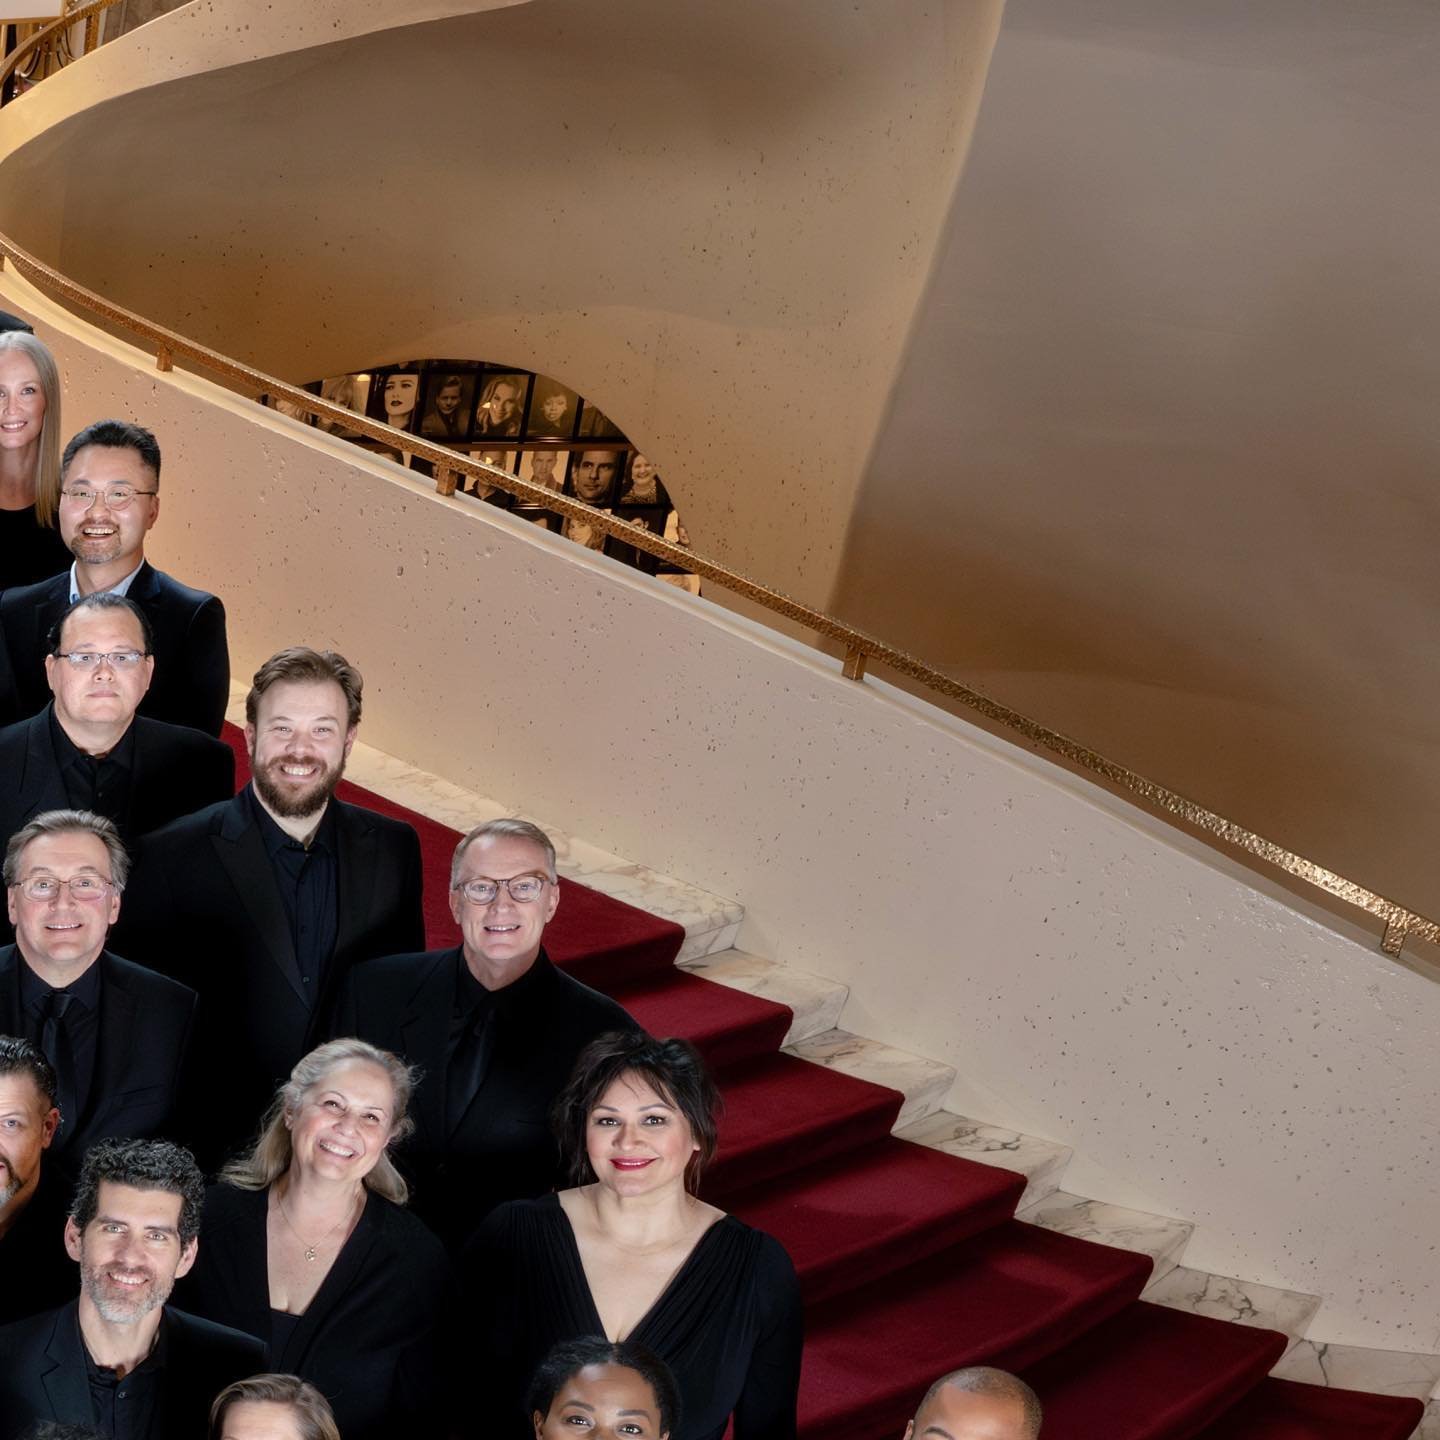 We unveil a new portrait today of the current full-time Met Opera Chorus with Maestro #DonaldPalumbo and @metopera Music Director Maestro @nezetseguin! You can see the entire shot by looking at our profile page. 📸 by @jennifertaylorphotography / Met